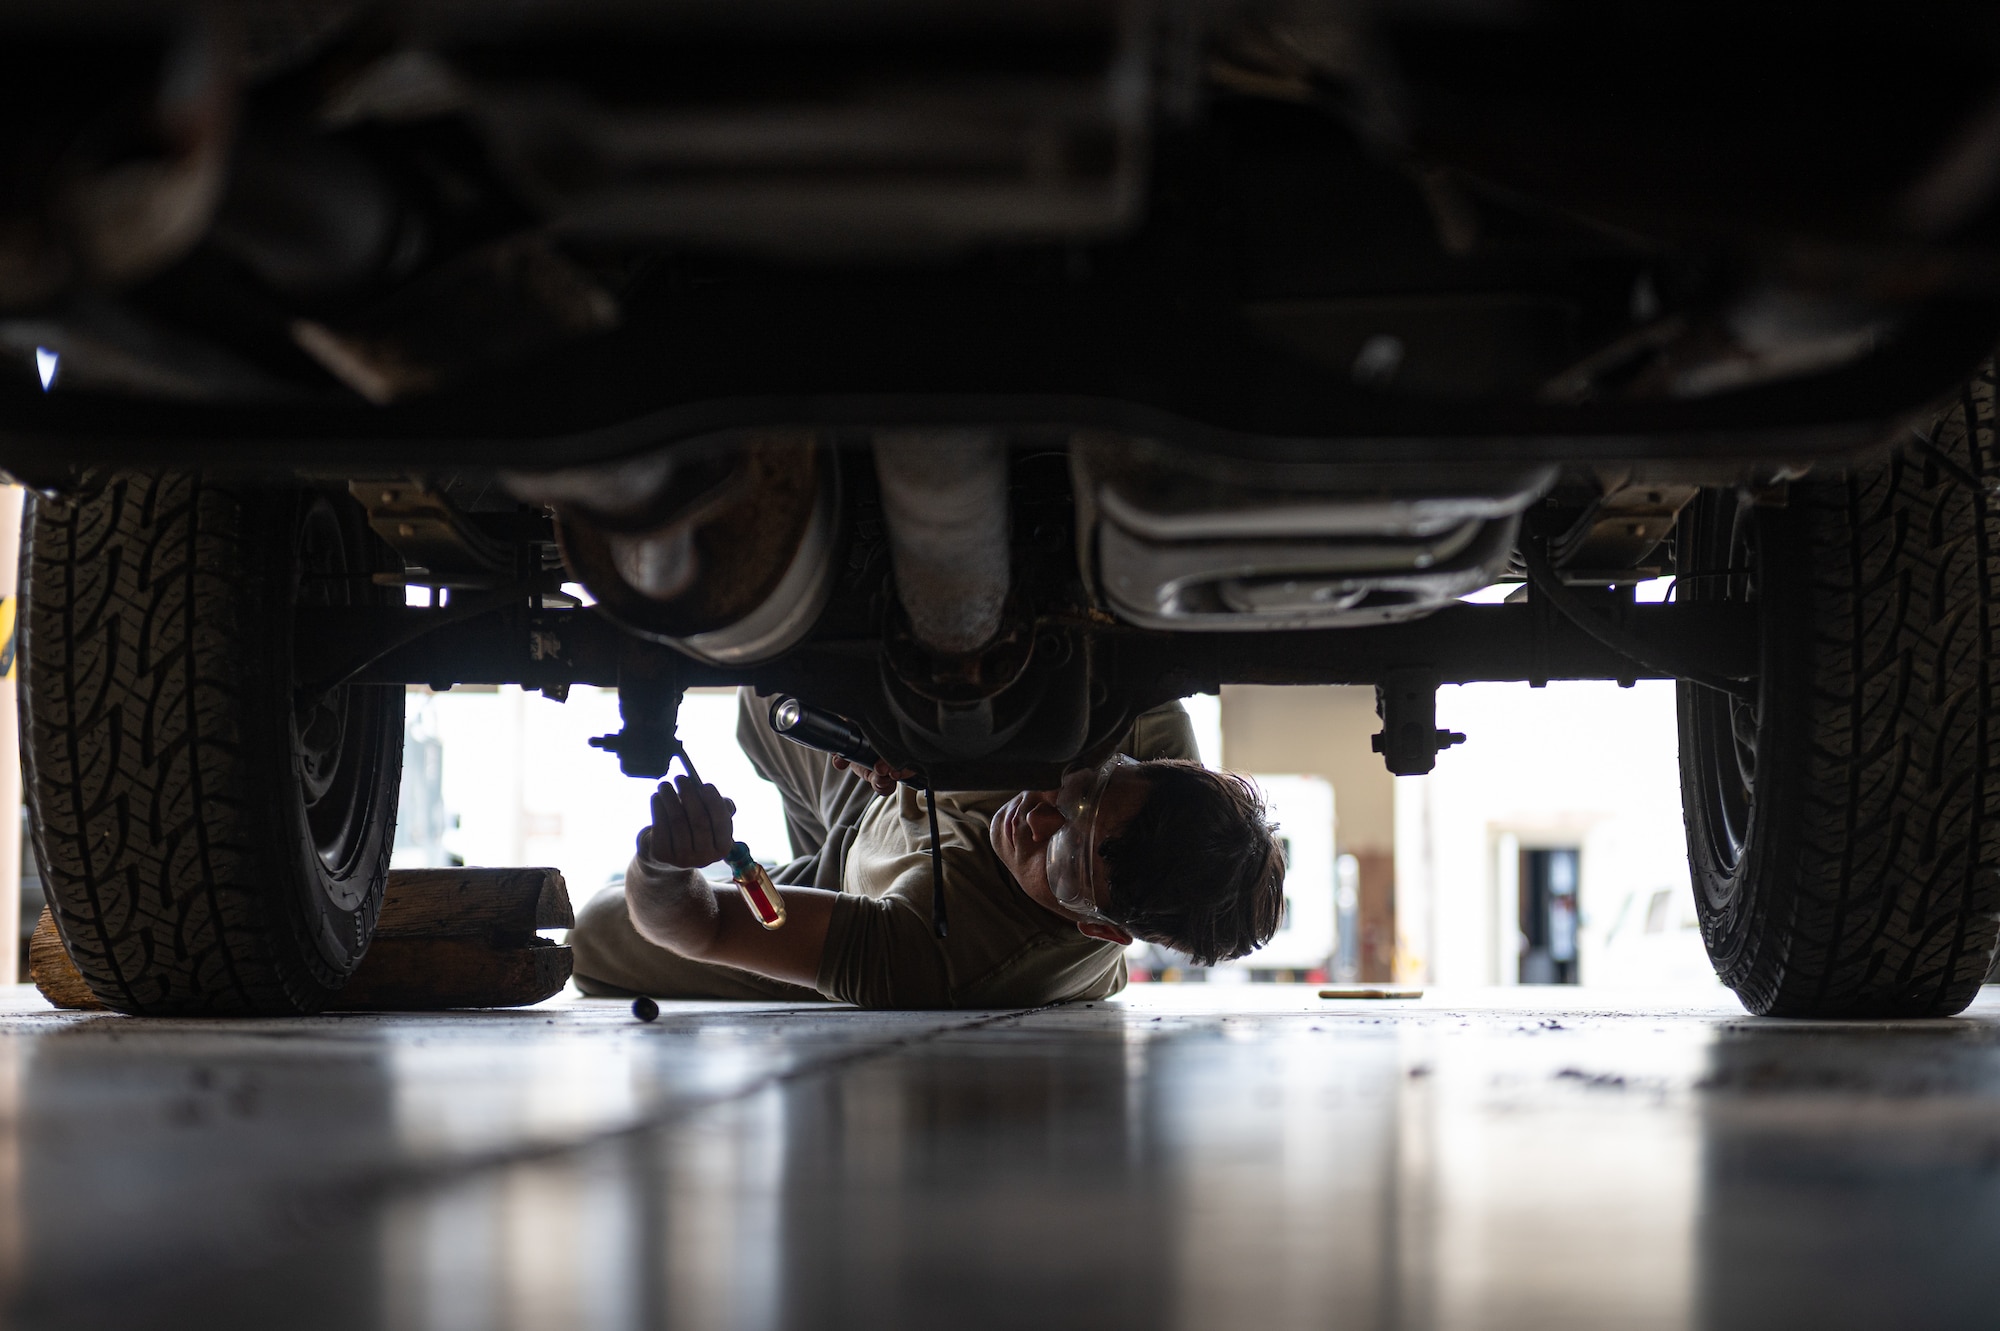 Airman inspecting truck undercarriage